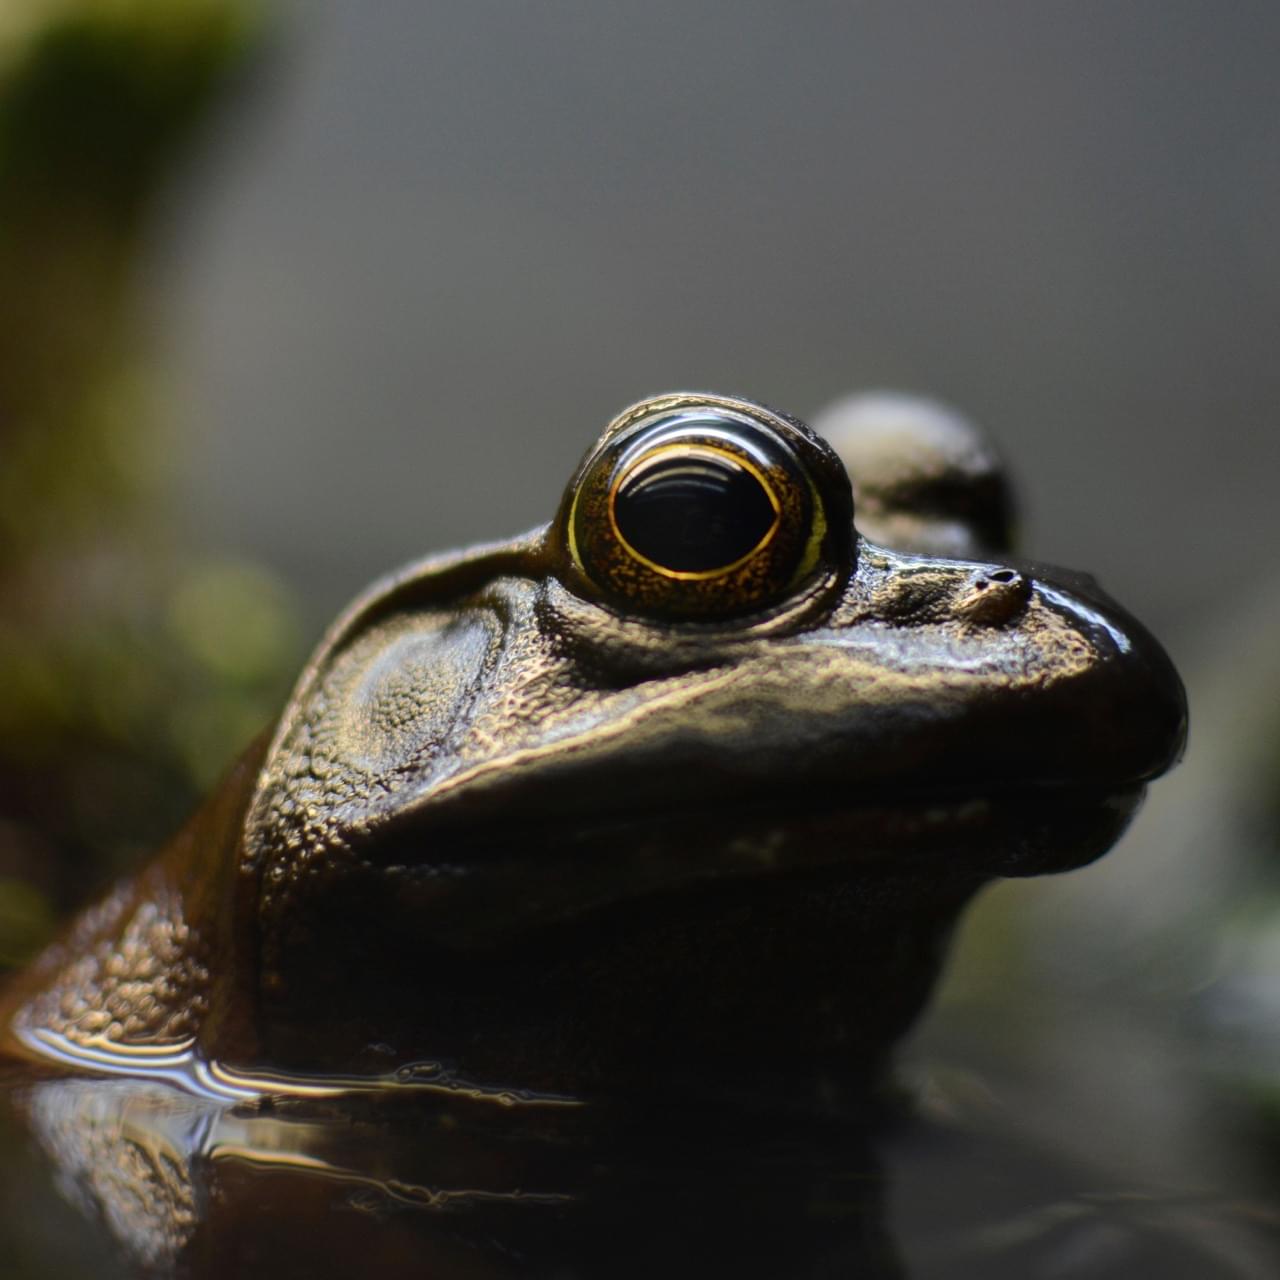 A brown frog.